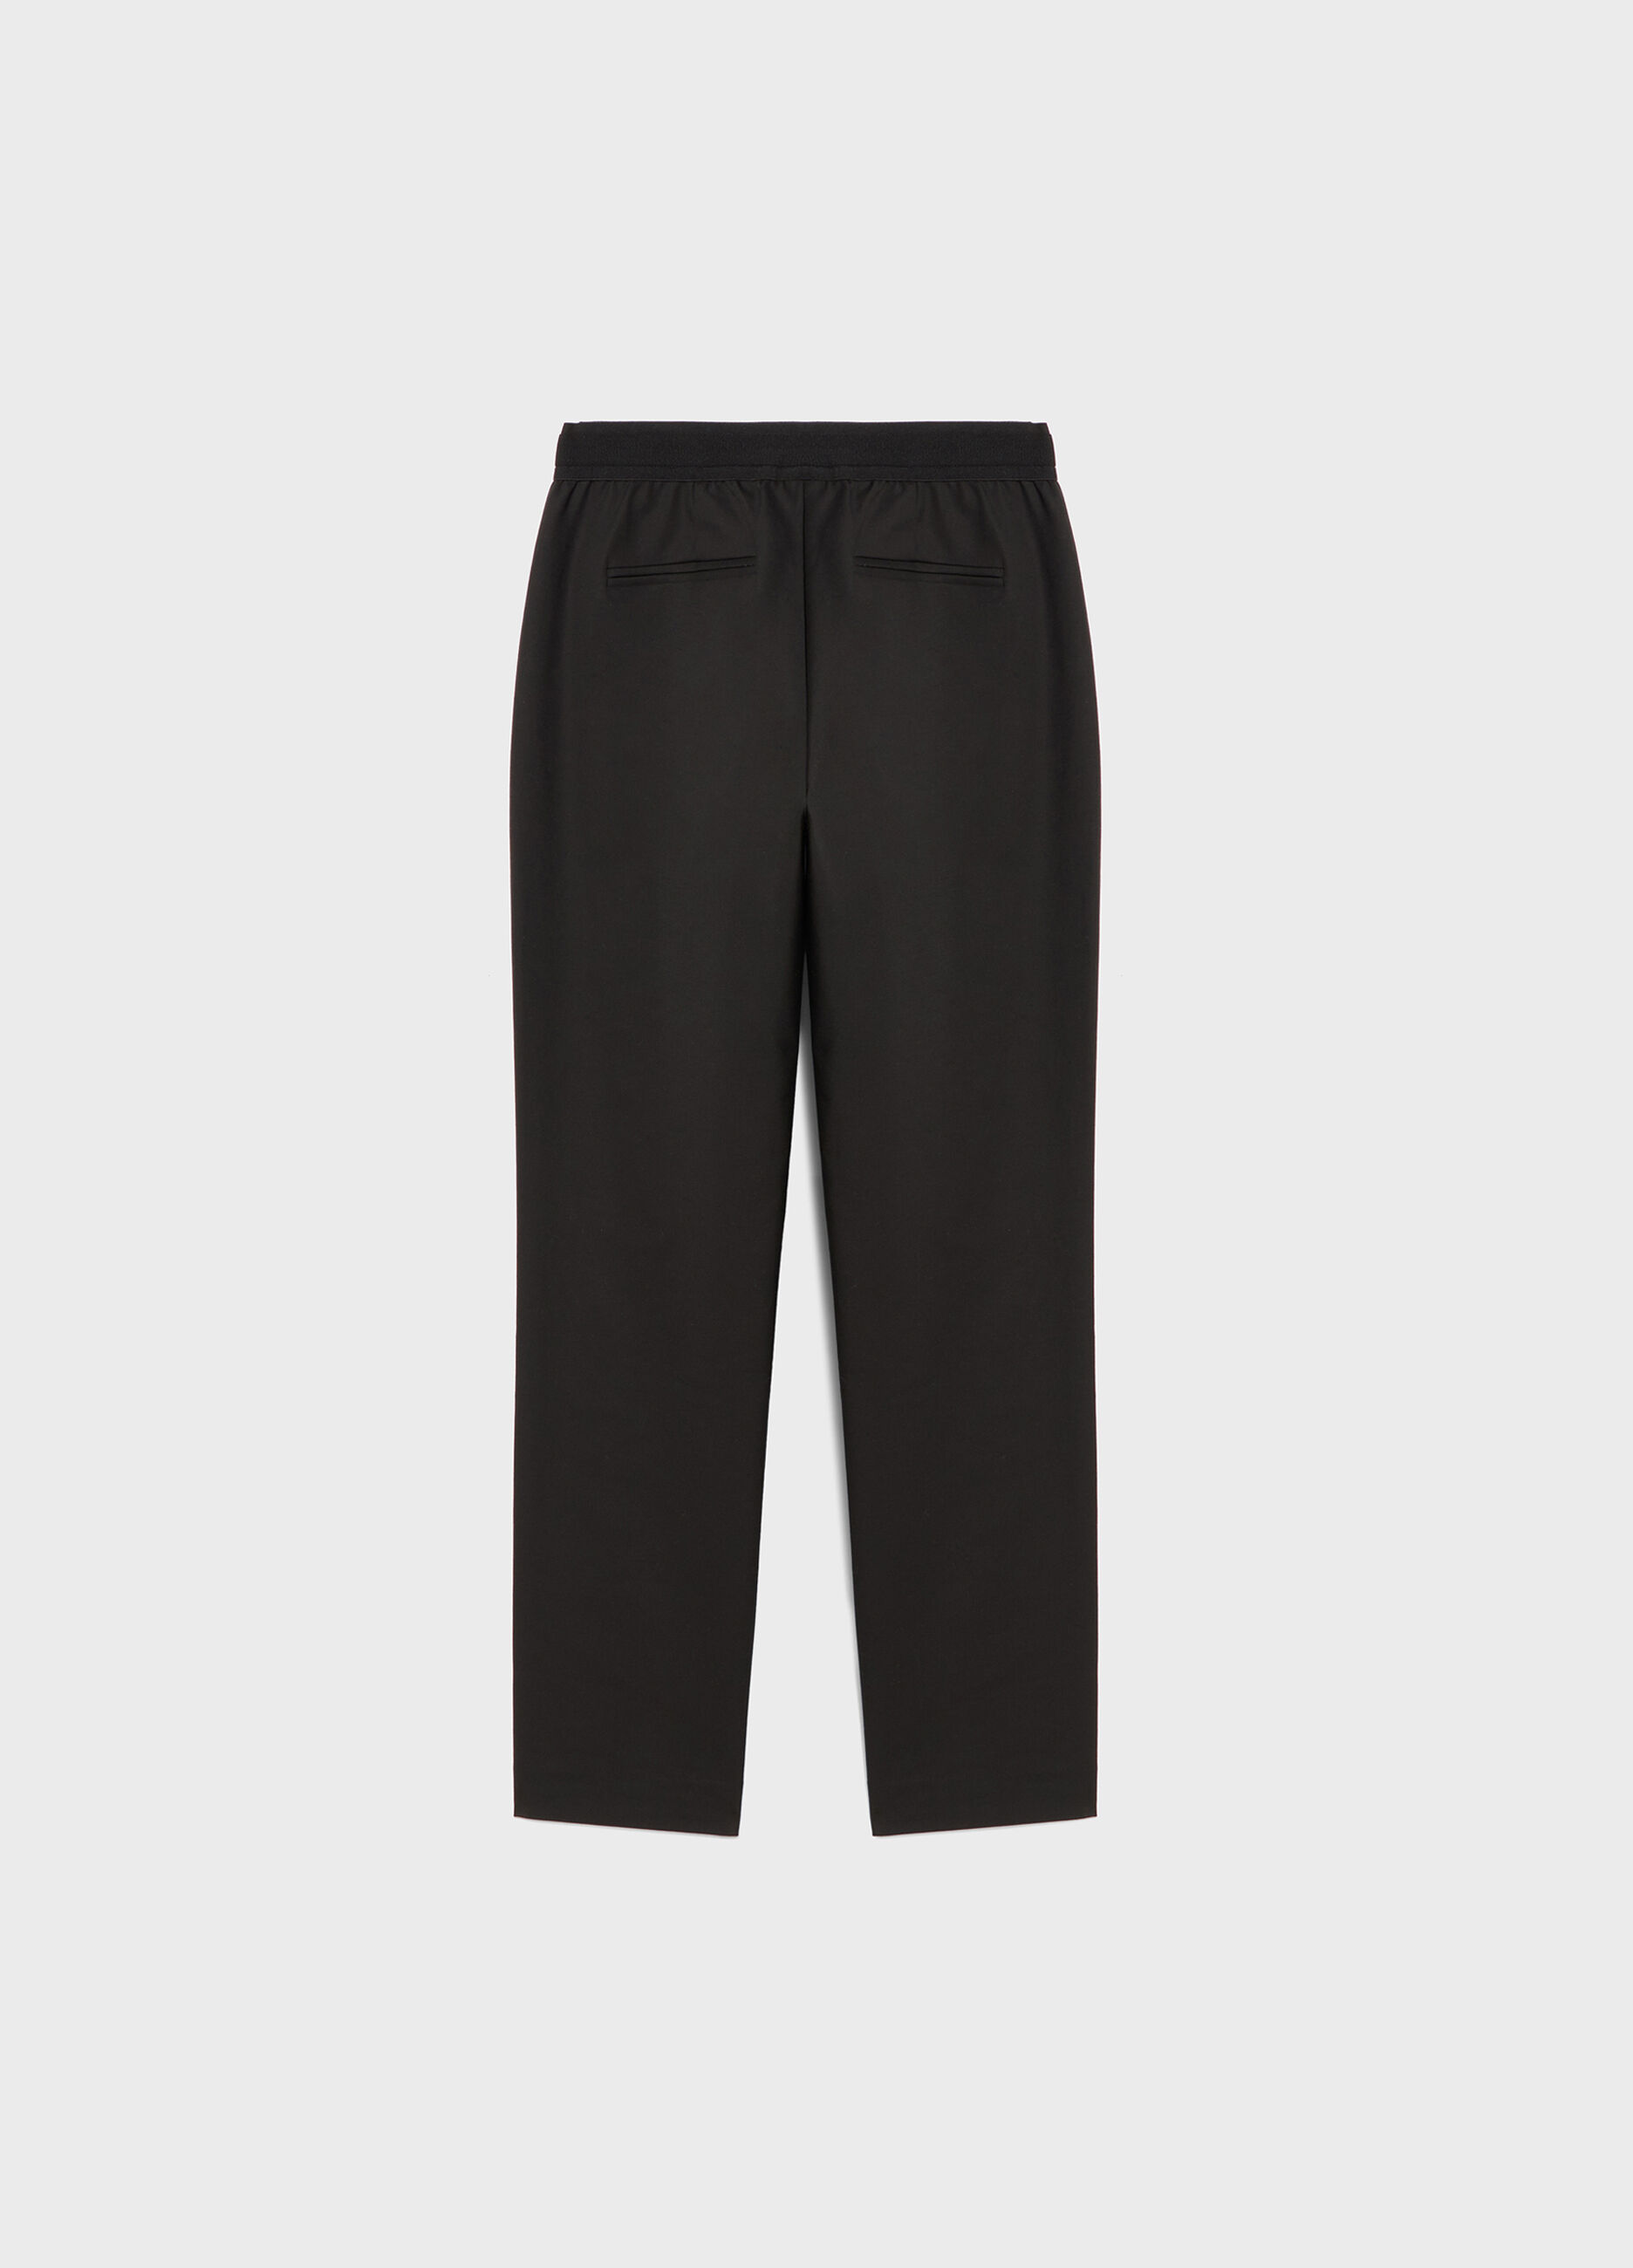 Black cigarette trousers with elastic_5